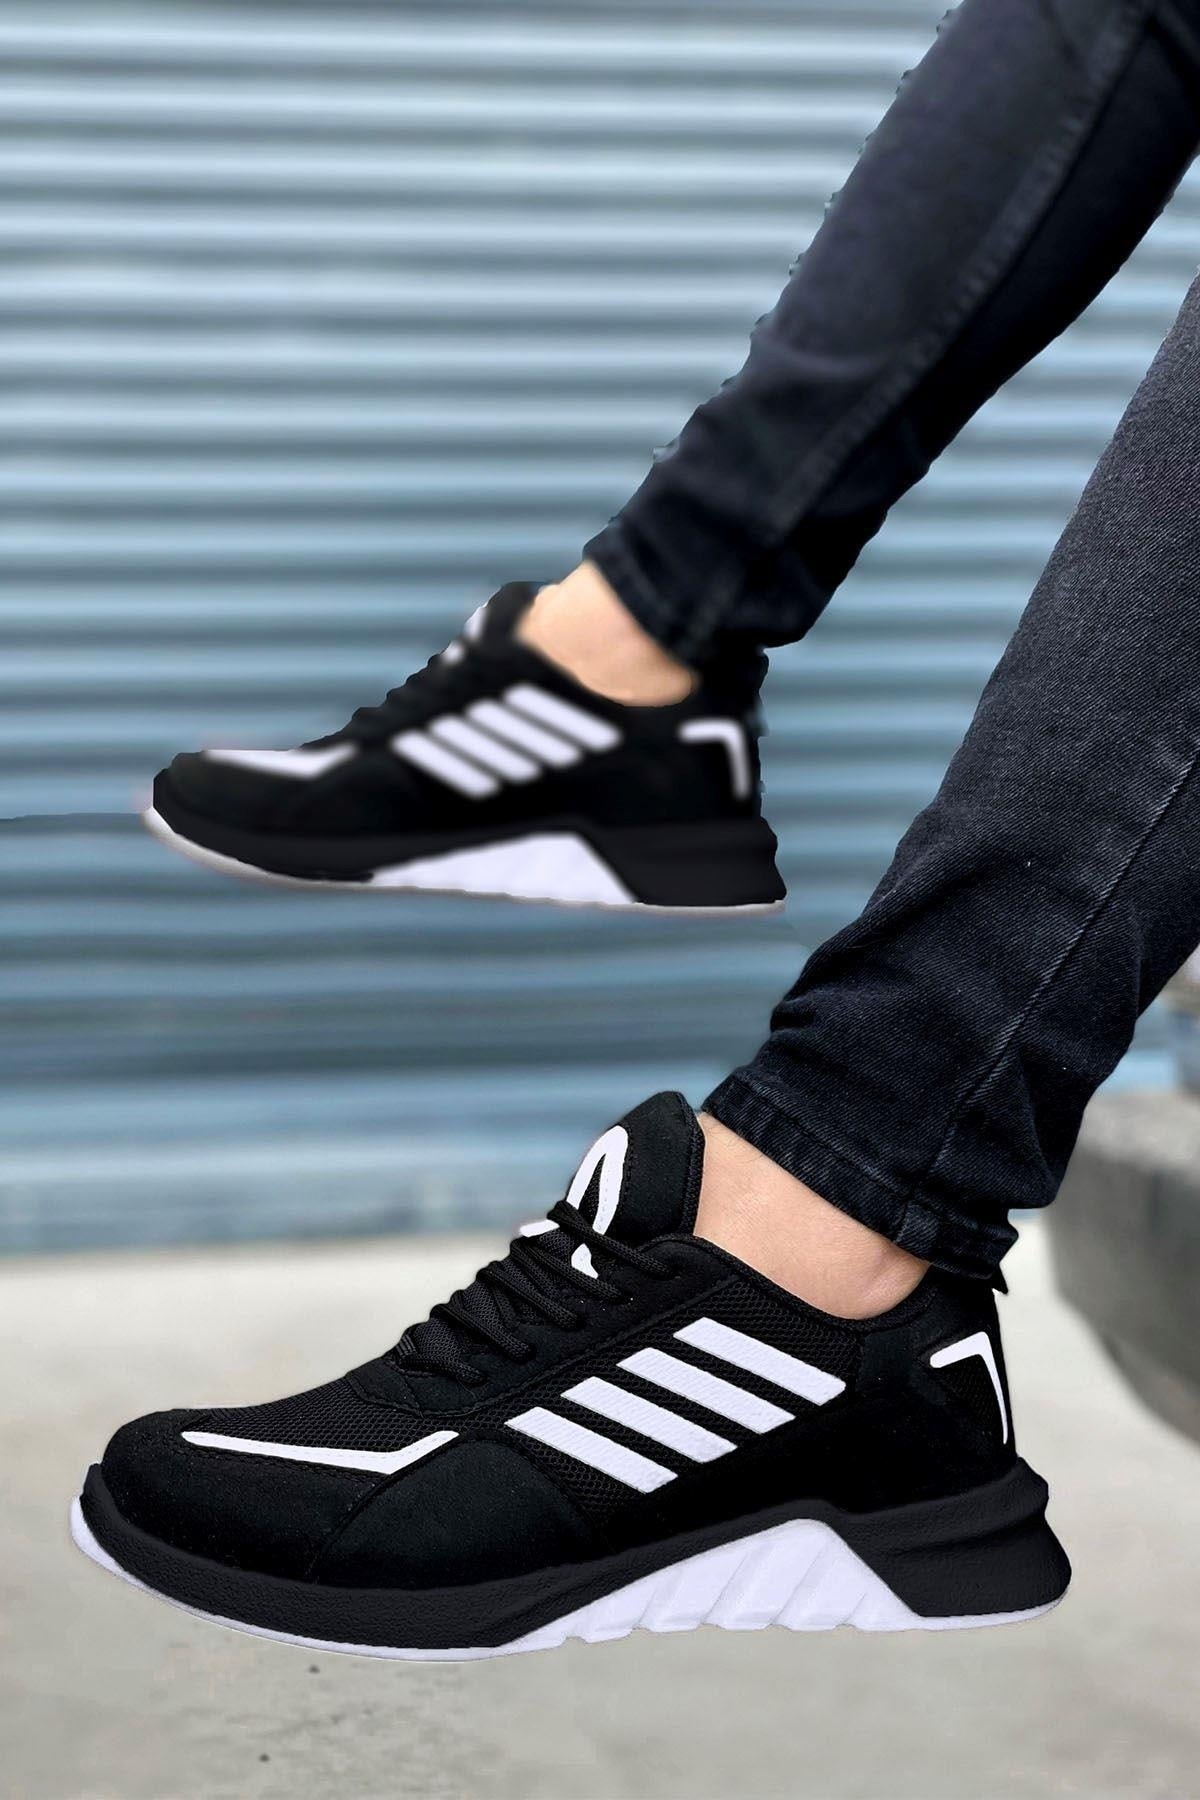 Black and White Striped Men's Sports Shoes